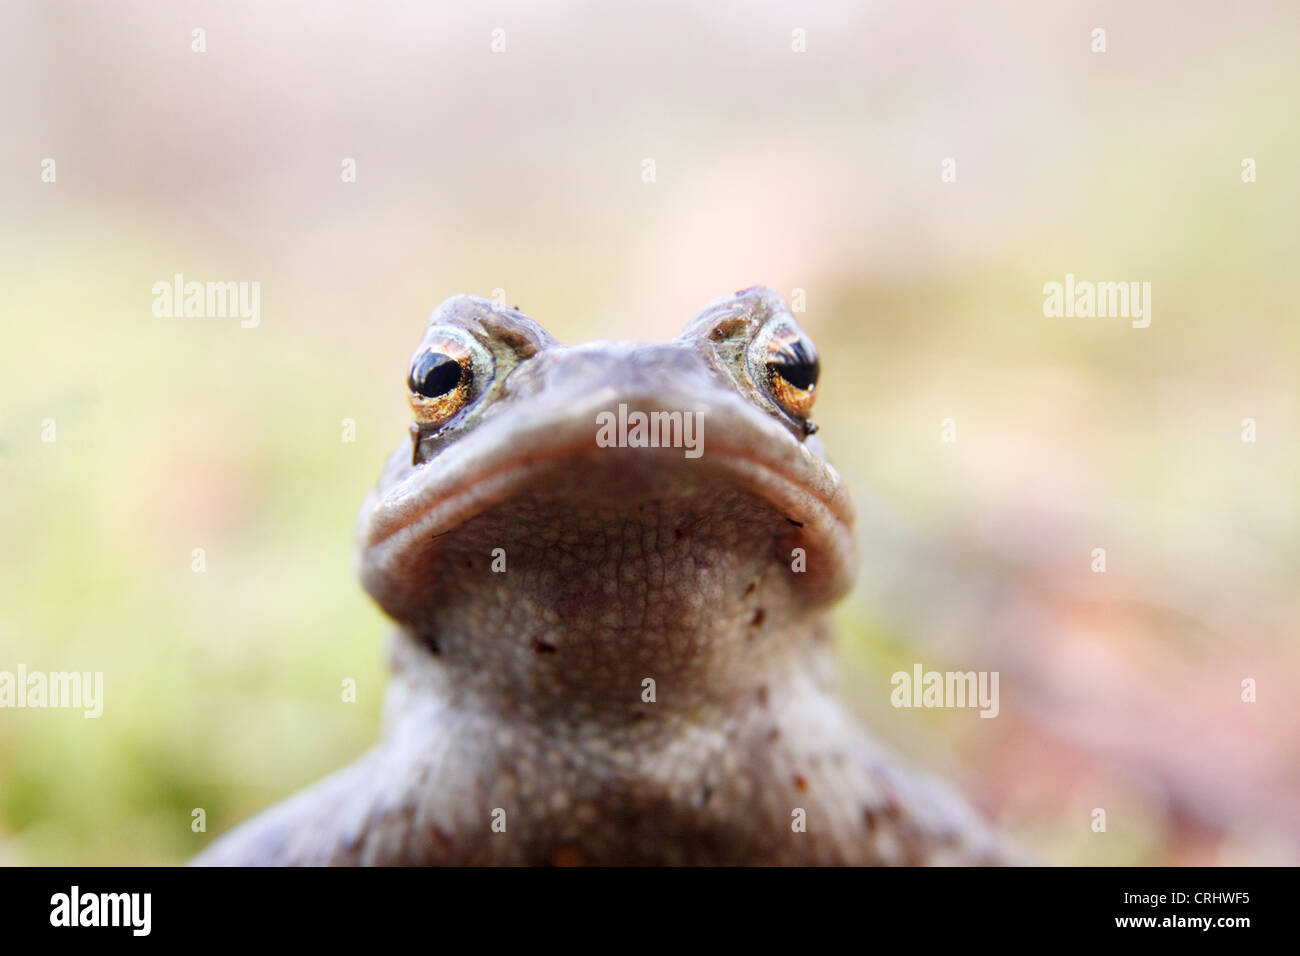 Close up portrait of a Common Toad (Bufo bufo), Highlands, Scotland, UK Stock Photo